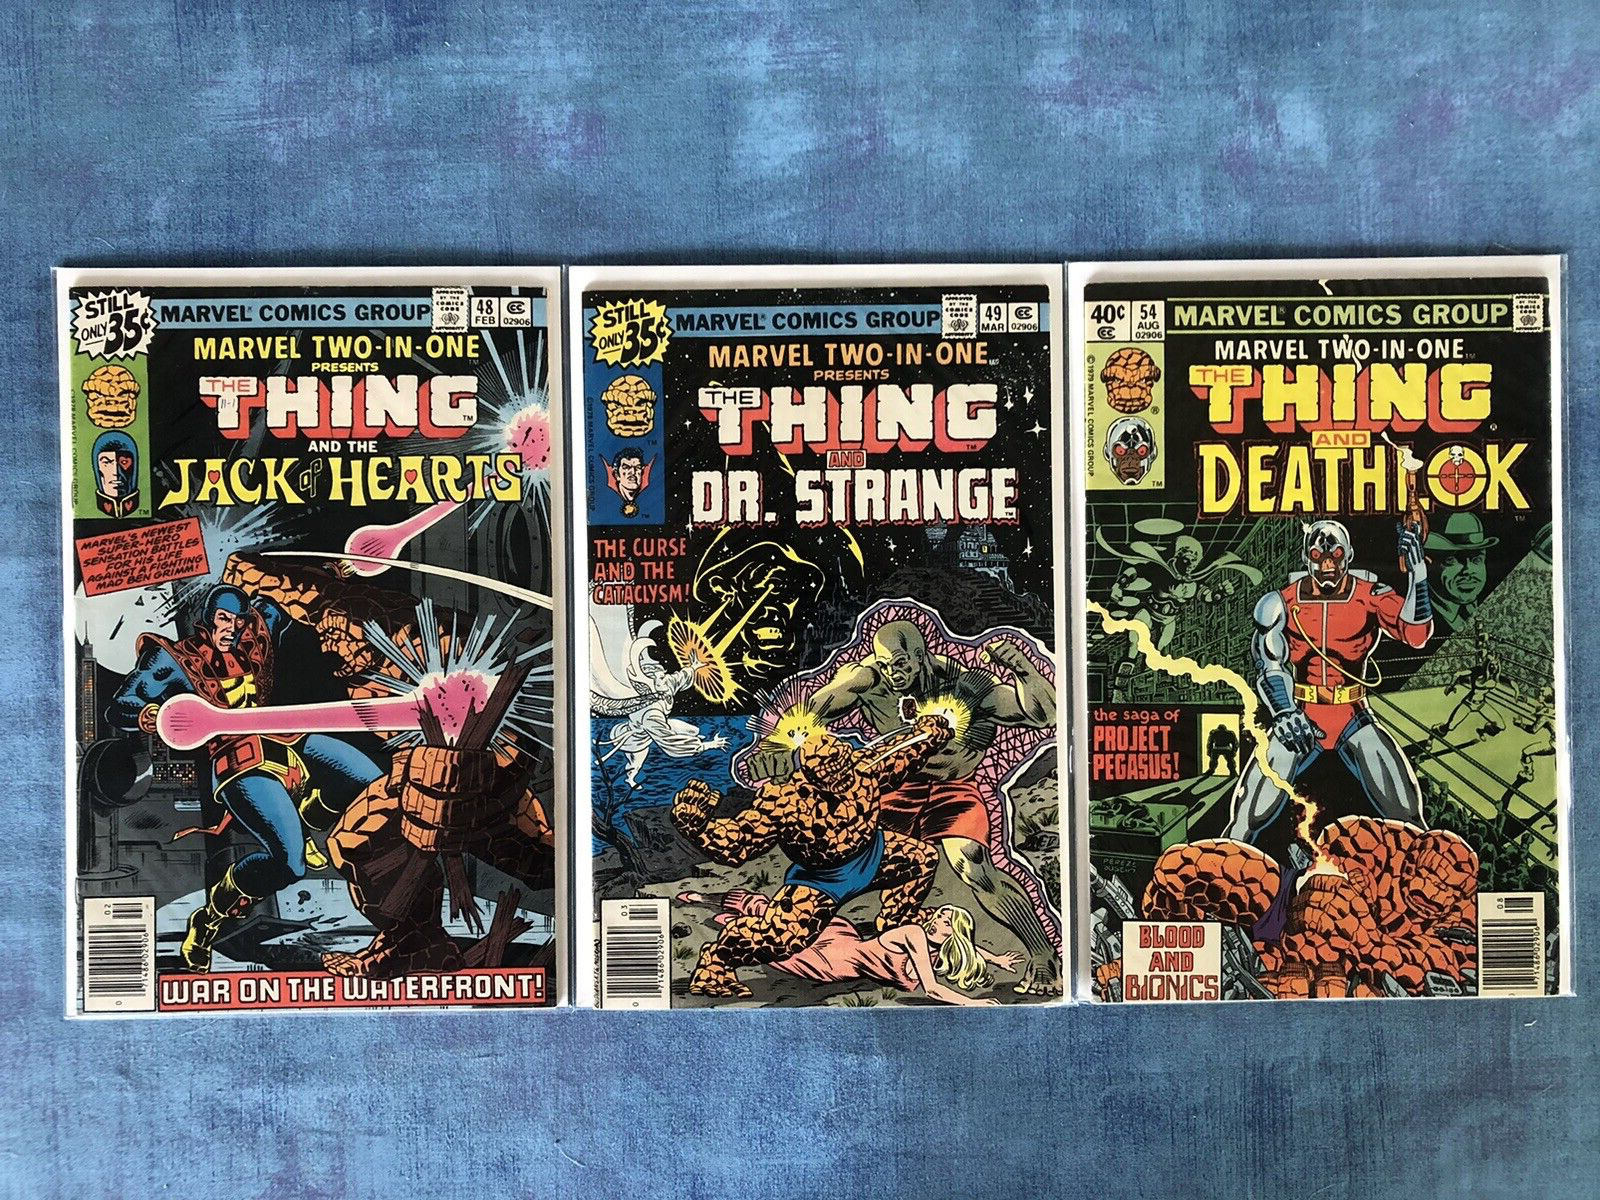 MARVEL TWO-IN-ONE - LOT OF 3 COMIC BOOKS - #48, 49, 54 - BRONZE AGE - VF